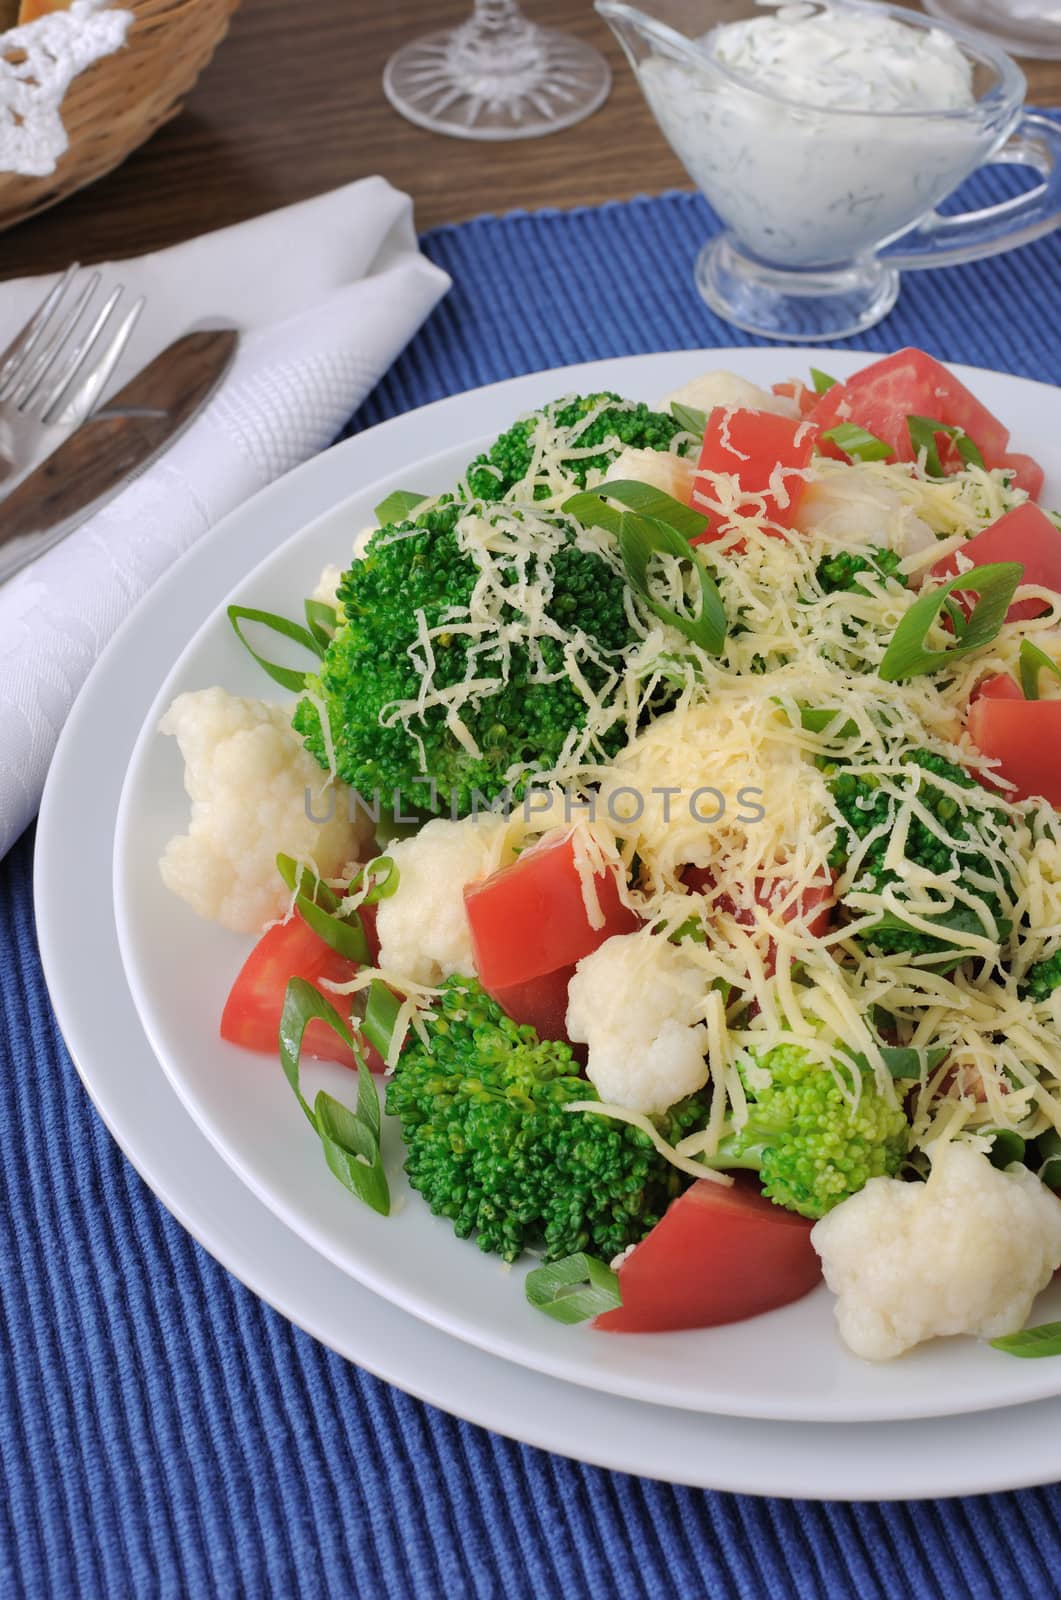 Cauliflower salad with tomatoes and broccoli by Apolonia